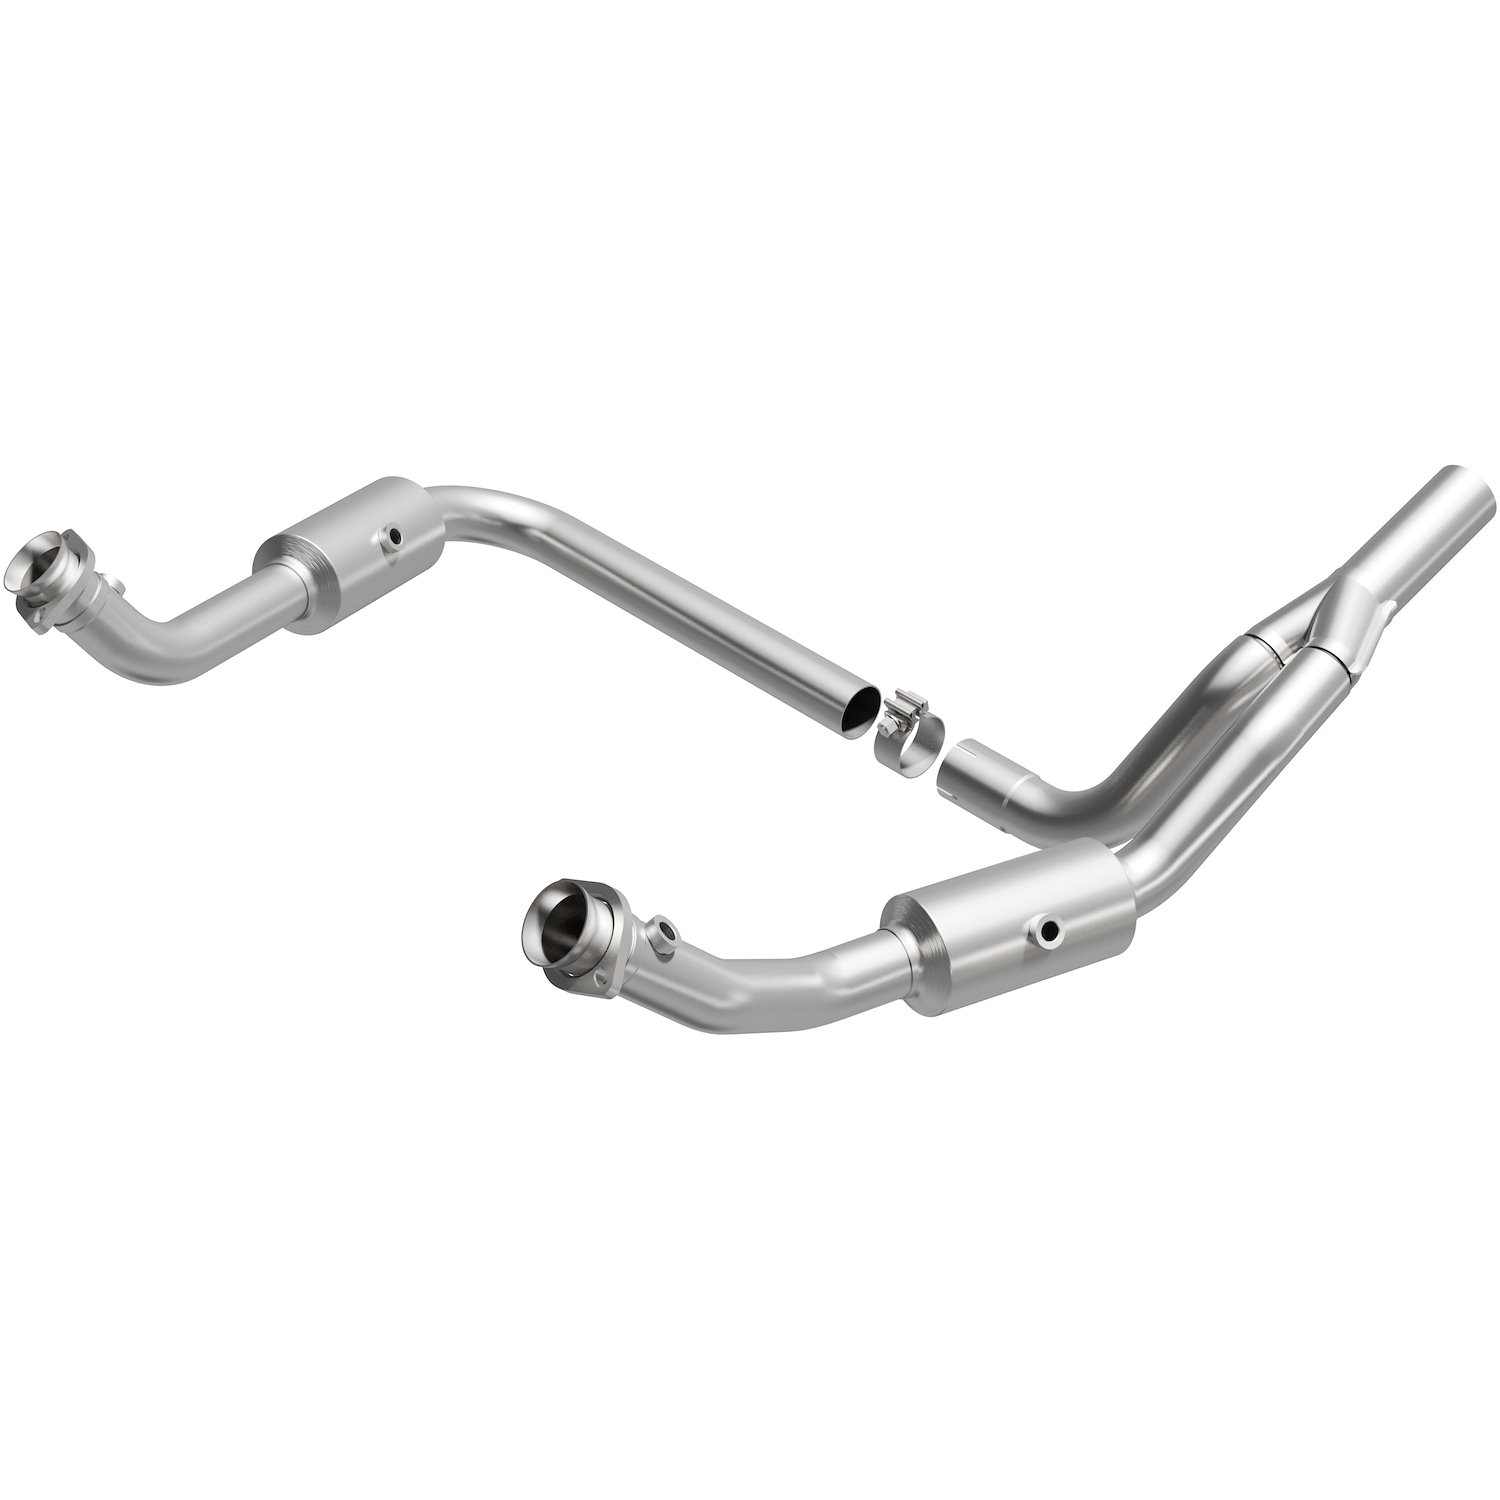 2010-2011 Jeep Wrangler California Grade CARB Compliant Direct-Fit Catalytic Converter